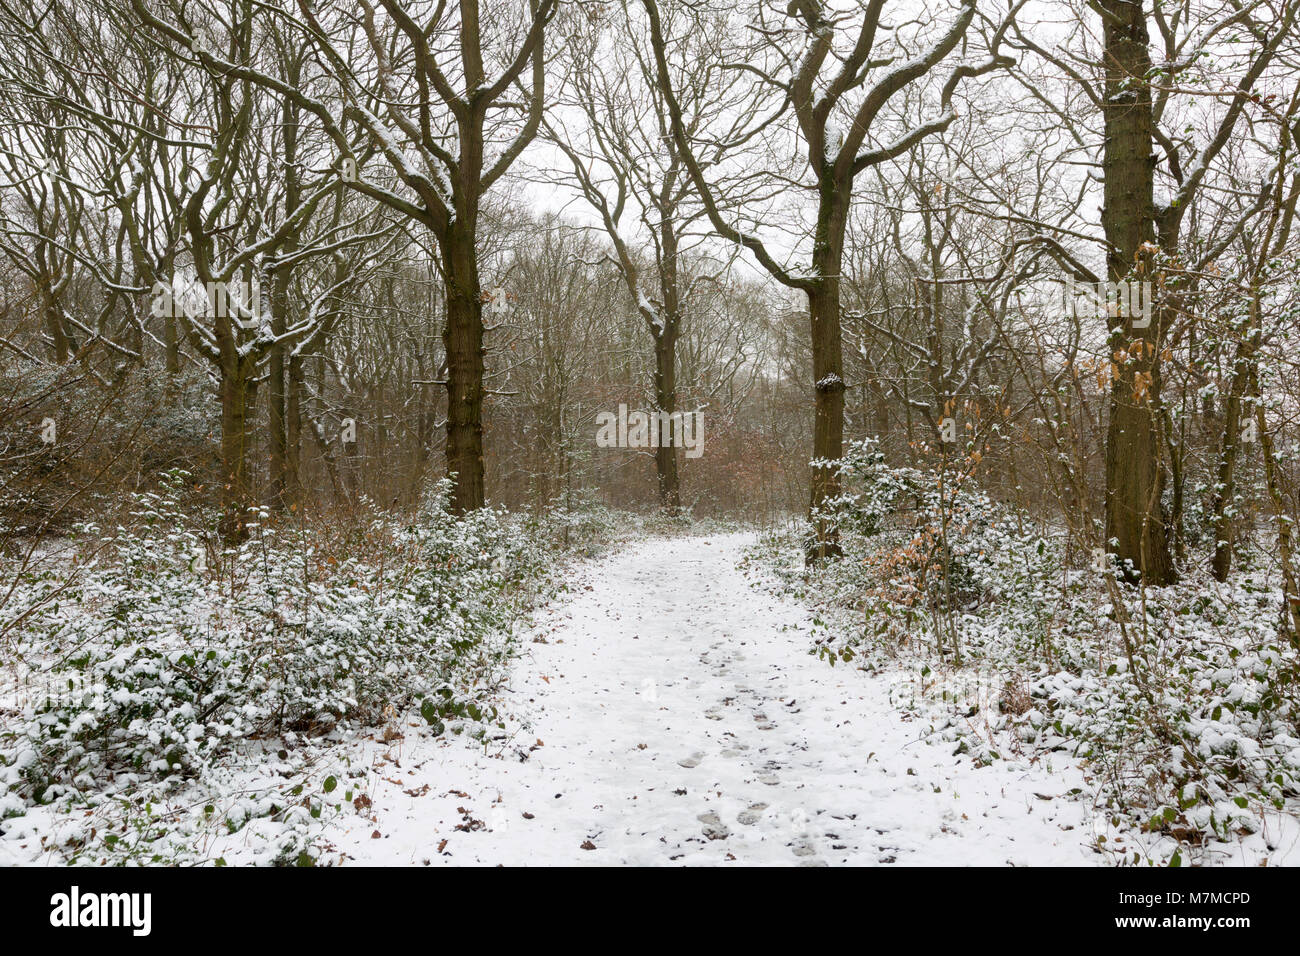 Pretty woodland, part of the ancient forest of The Blean, in the snow - Dunkirk, Faversham, kent Stock Photo